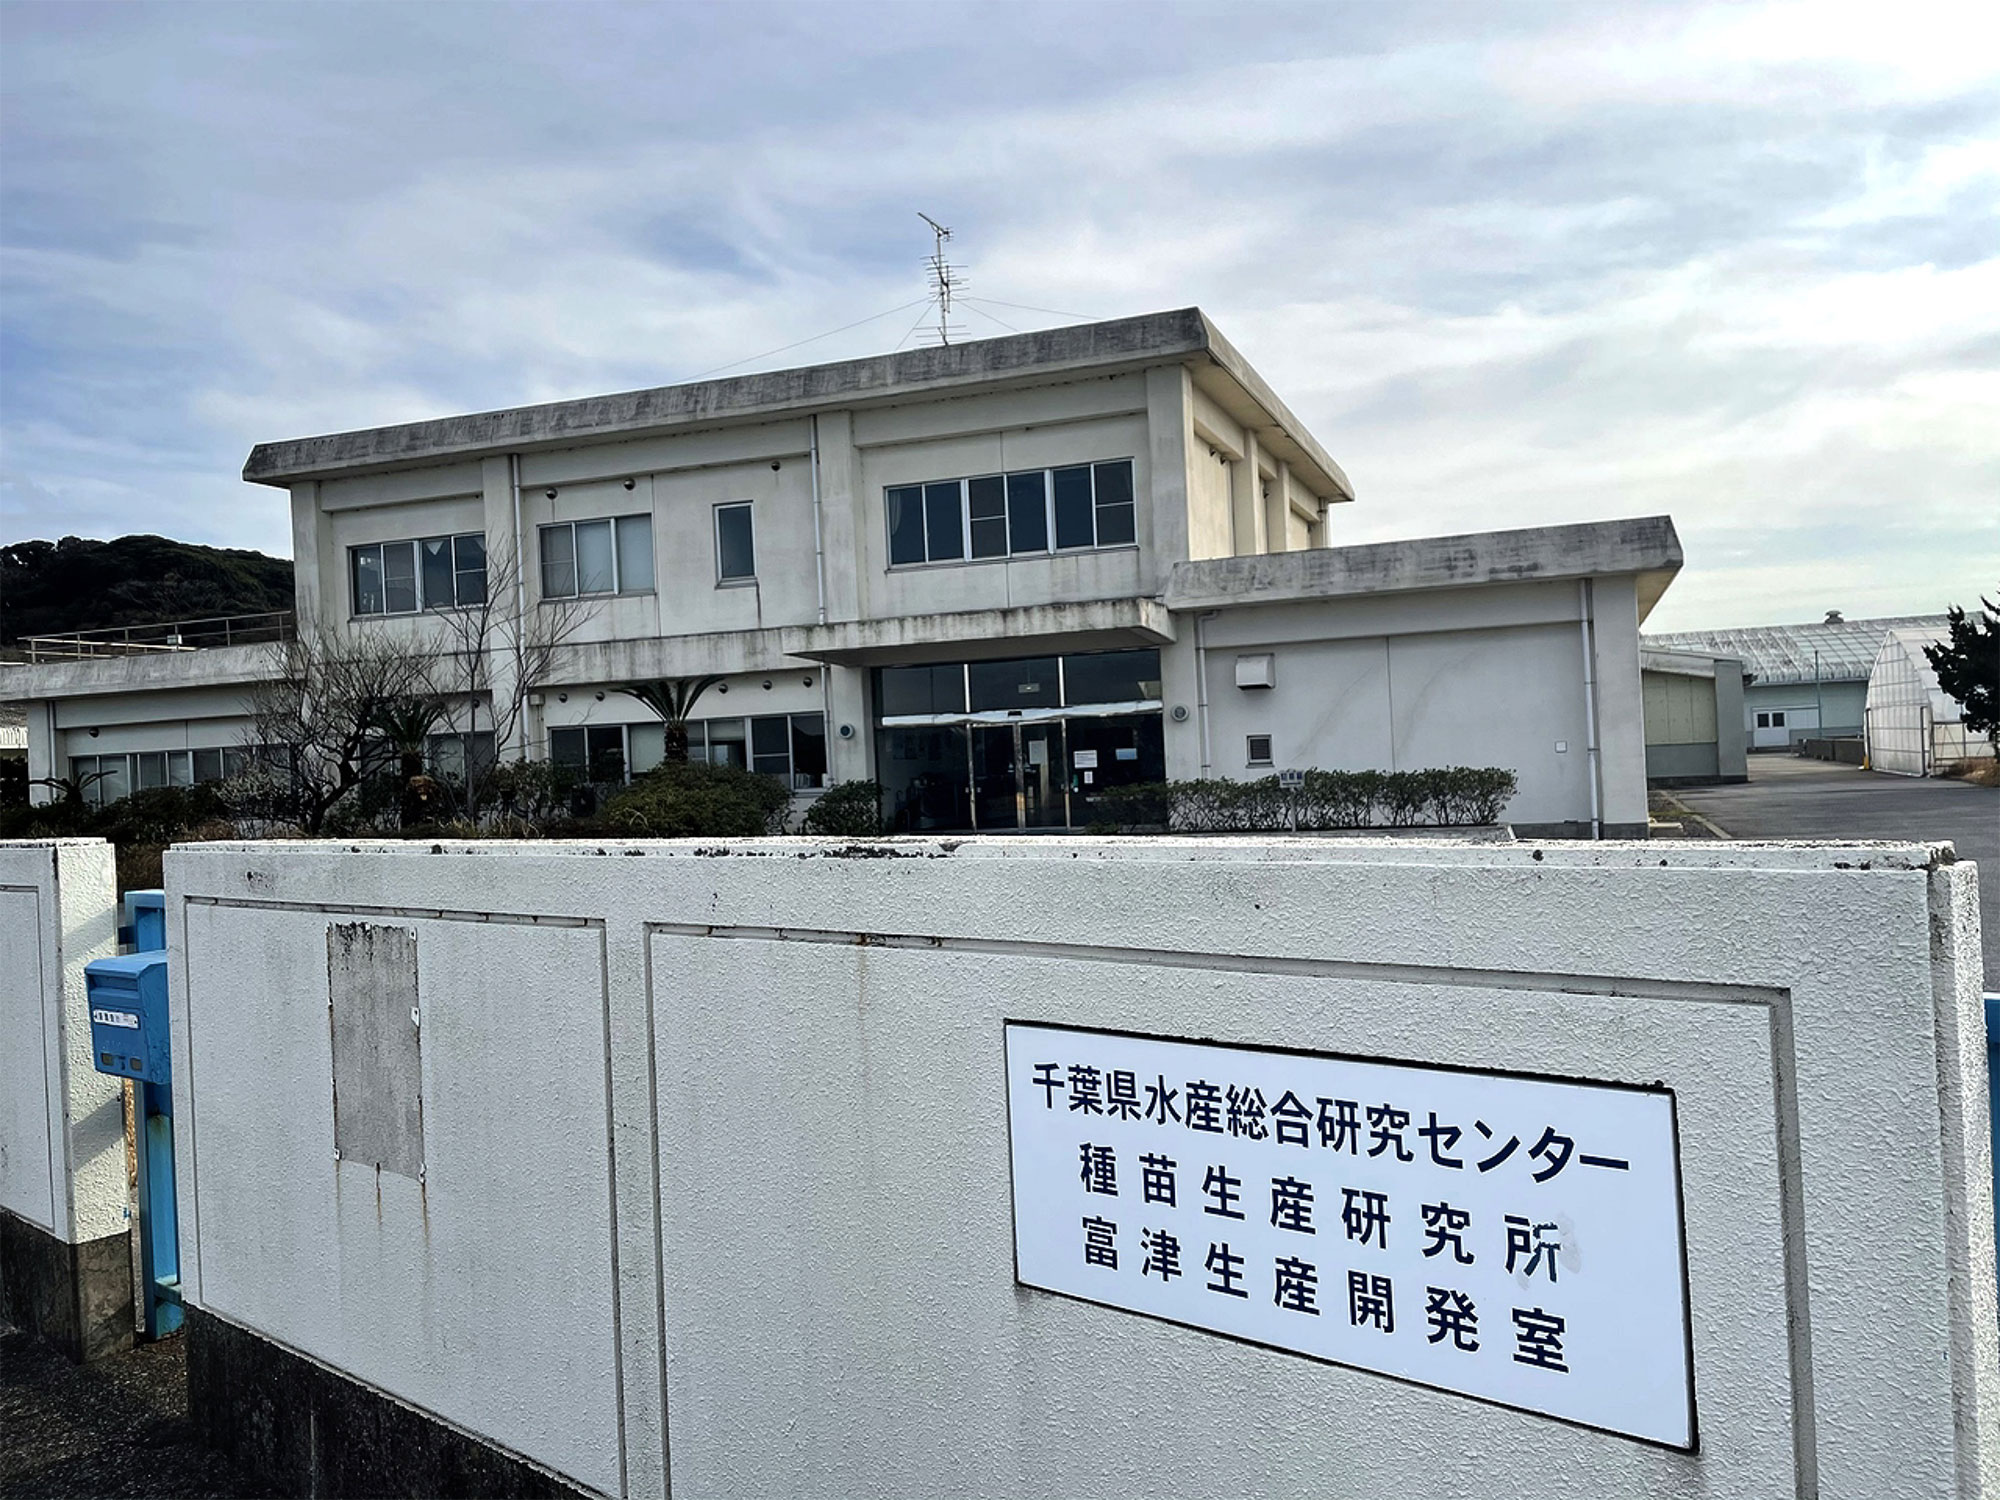 Chiba Prefectural Fisheries Research Center, Seed Production Research Laboratory, Futtsu Sea Farming Section